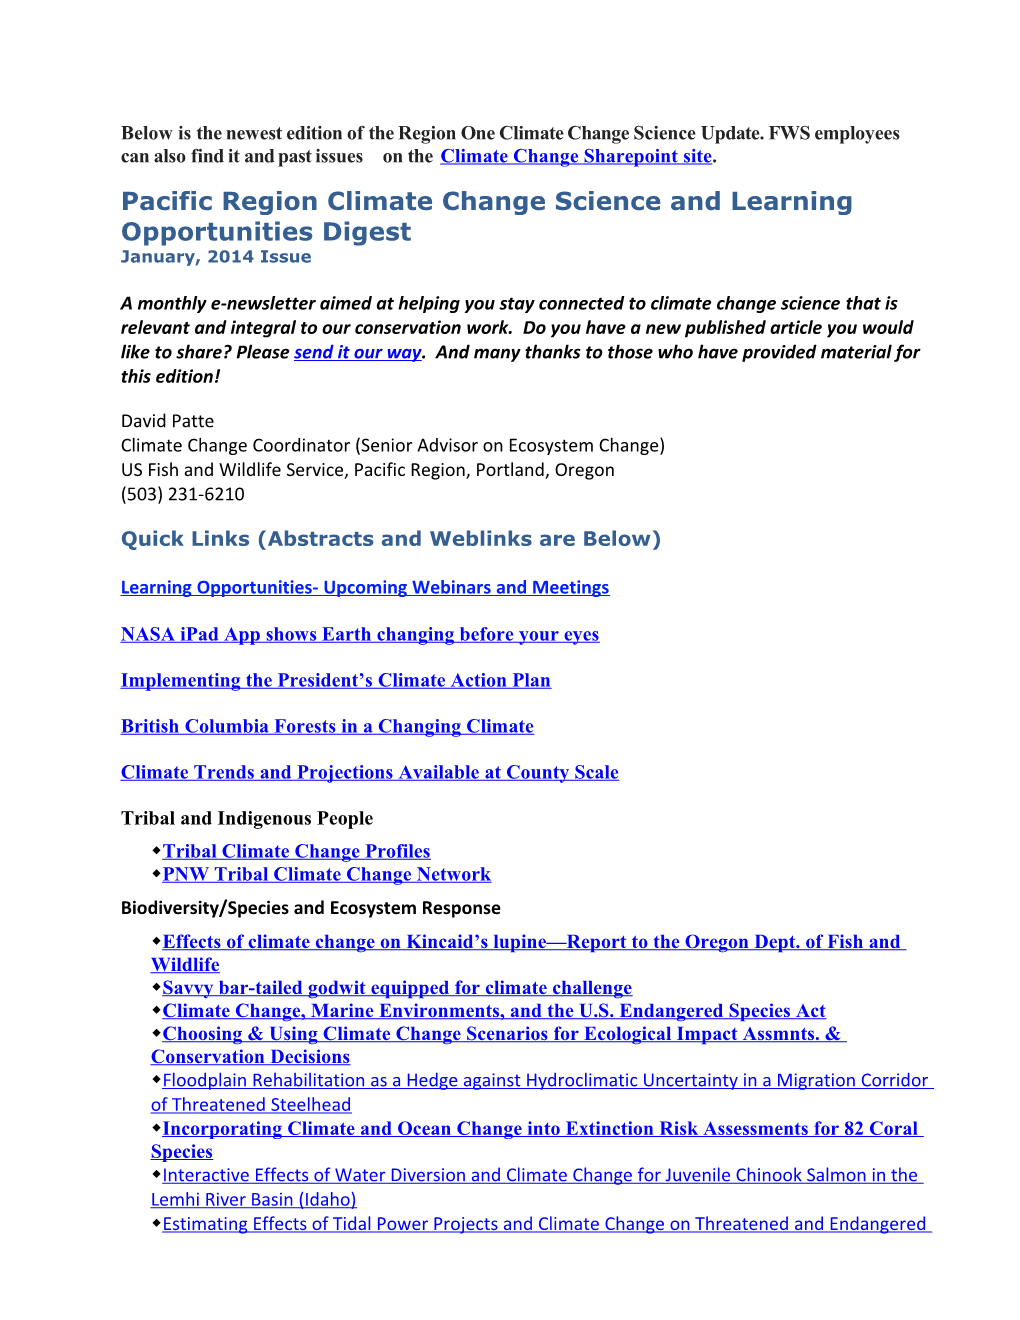 Pacific Region Climate Change Science and Learning Opportunities Digest